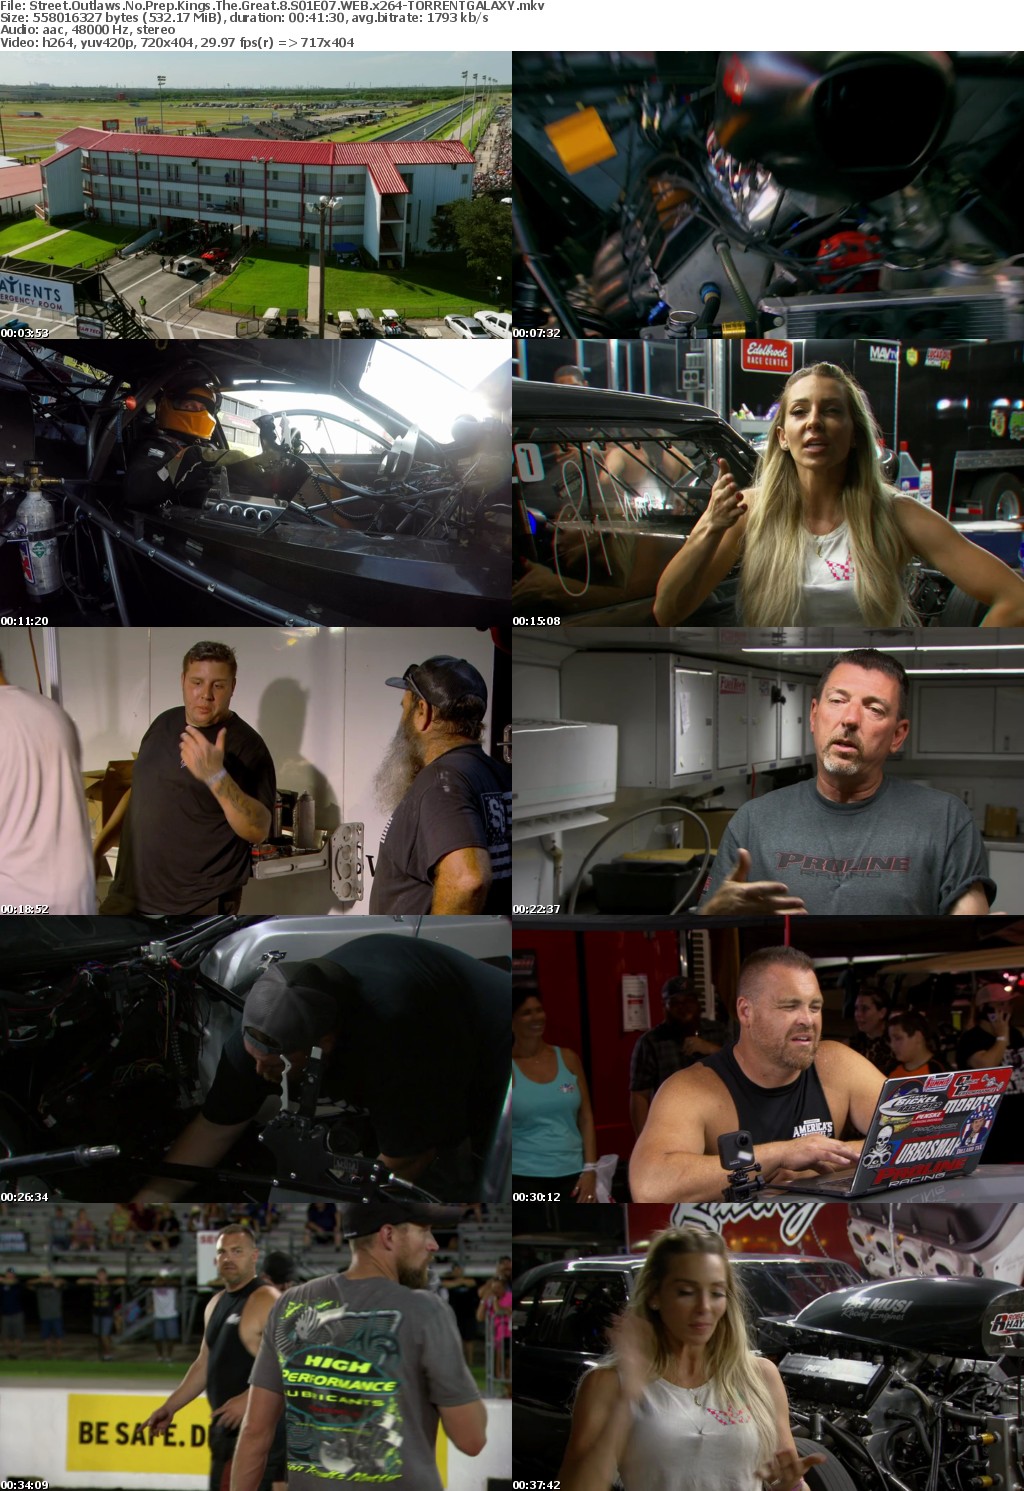 Street Outlaws No Prep Kings The Great 8 S01E07 WEB x264-GALAXY